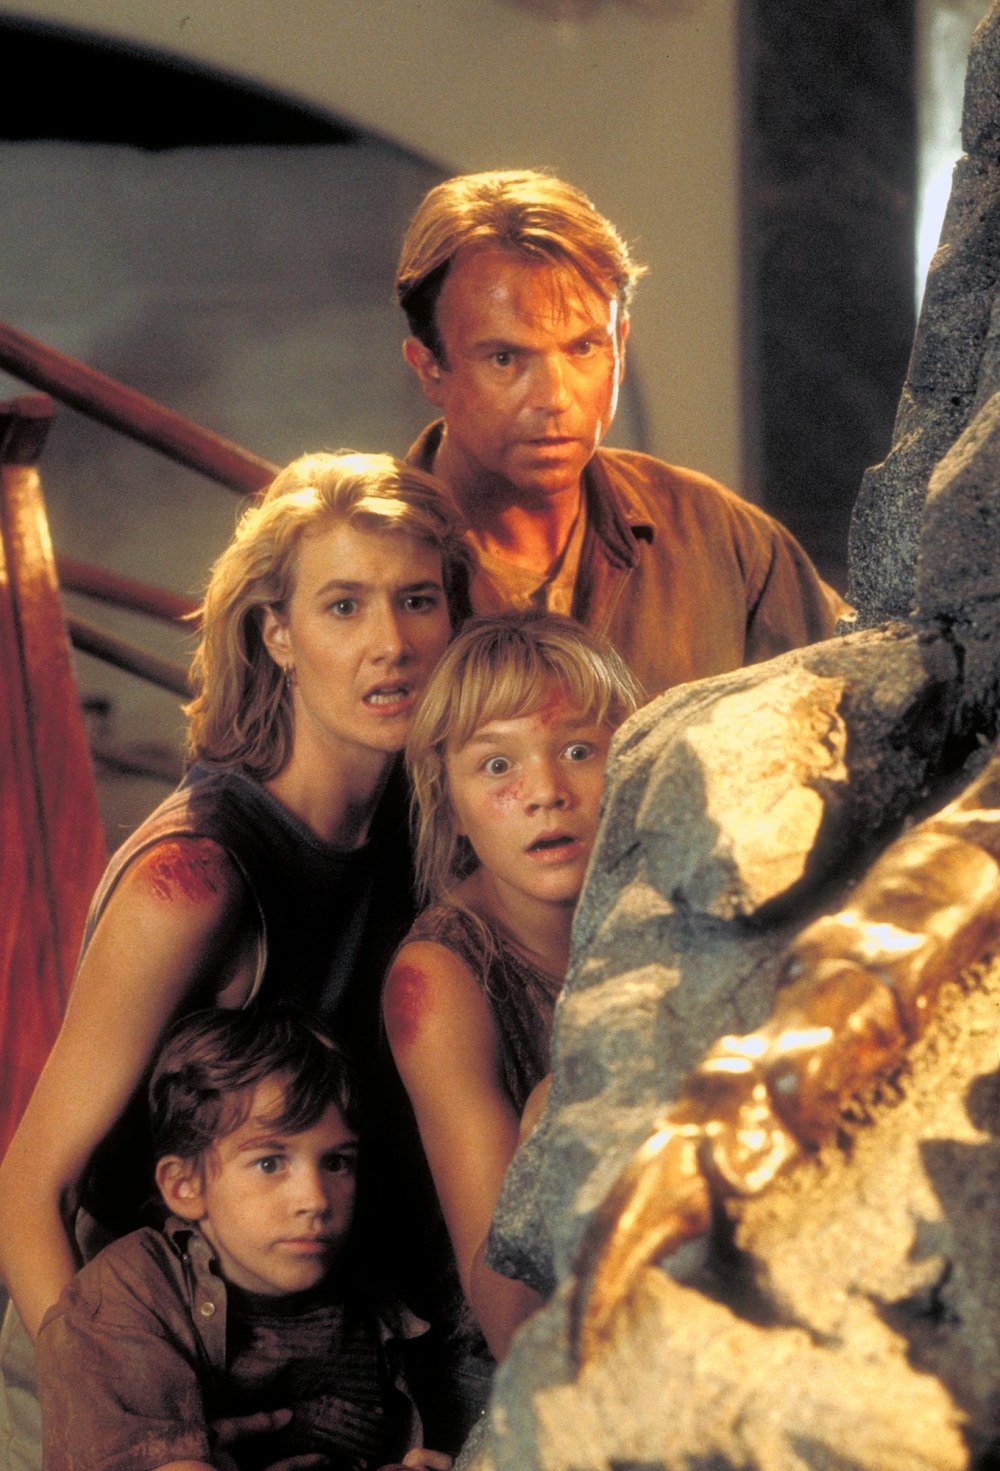 Jurassic Park s Sam Neill Is Not Remotely Afraid of Dying After Latest Round of Chemo Doesn t Work 403